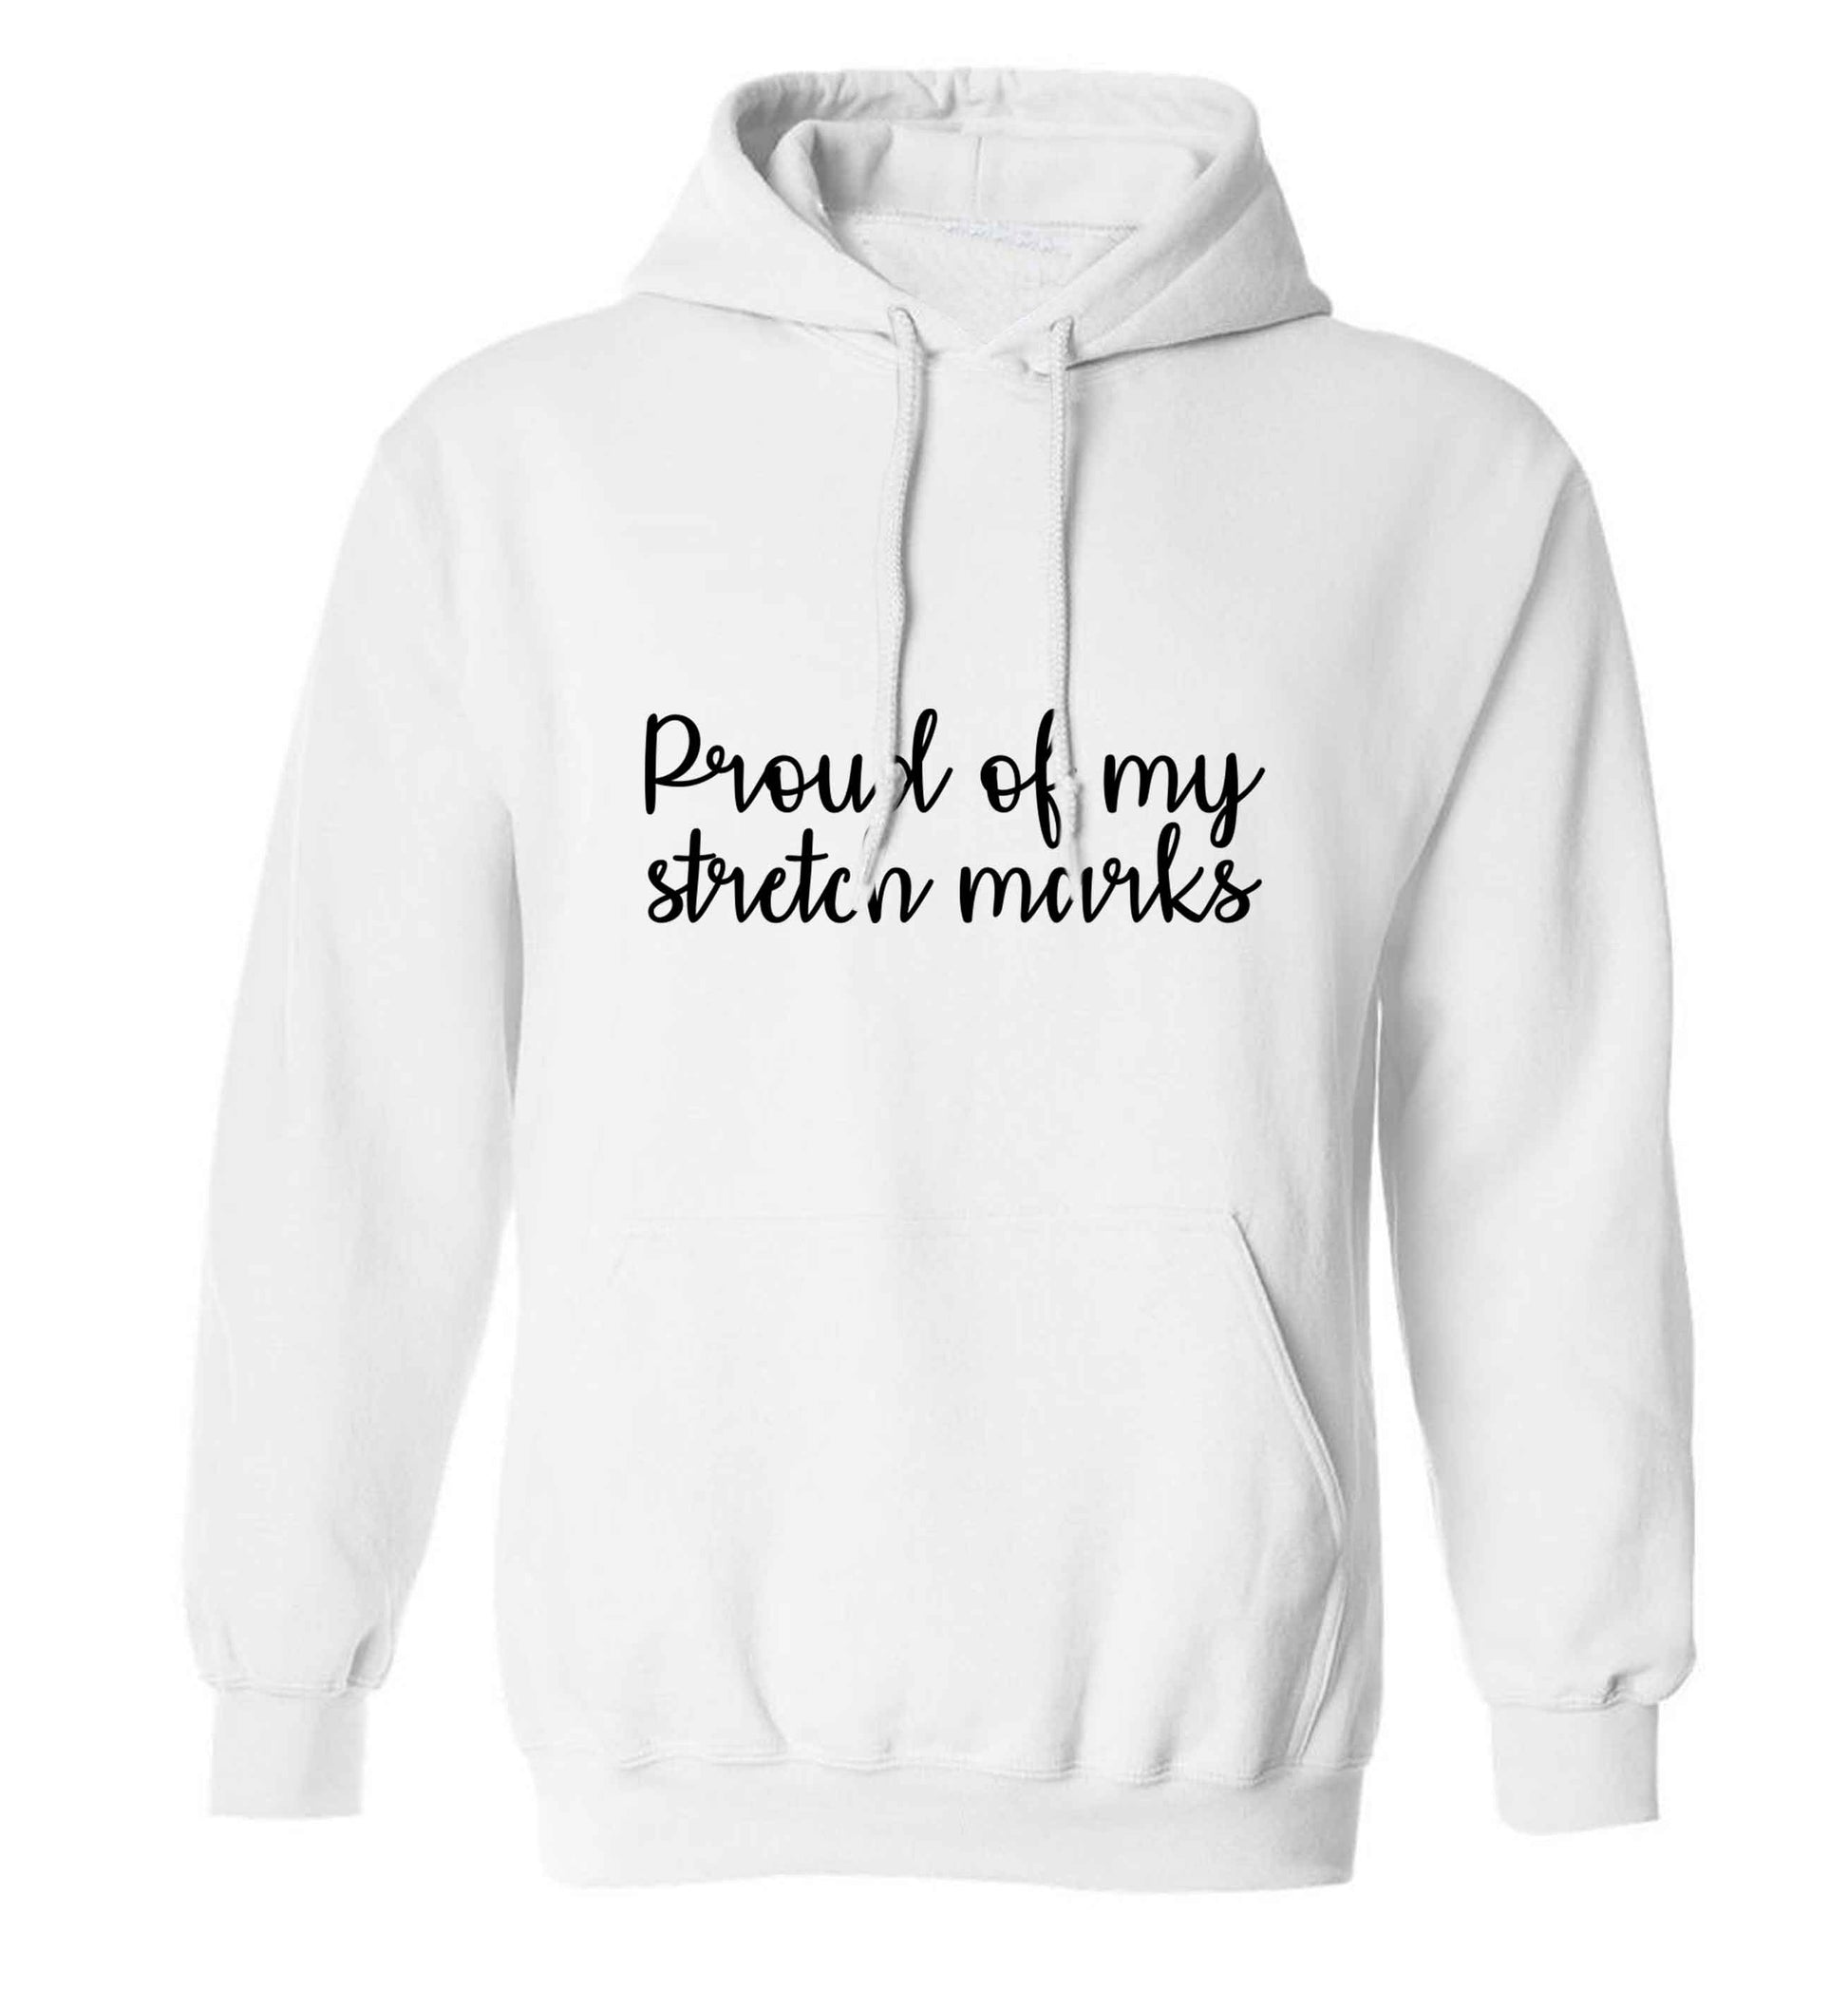 Proud of my stretch marks adults unisex white hoodie 2XL